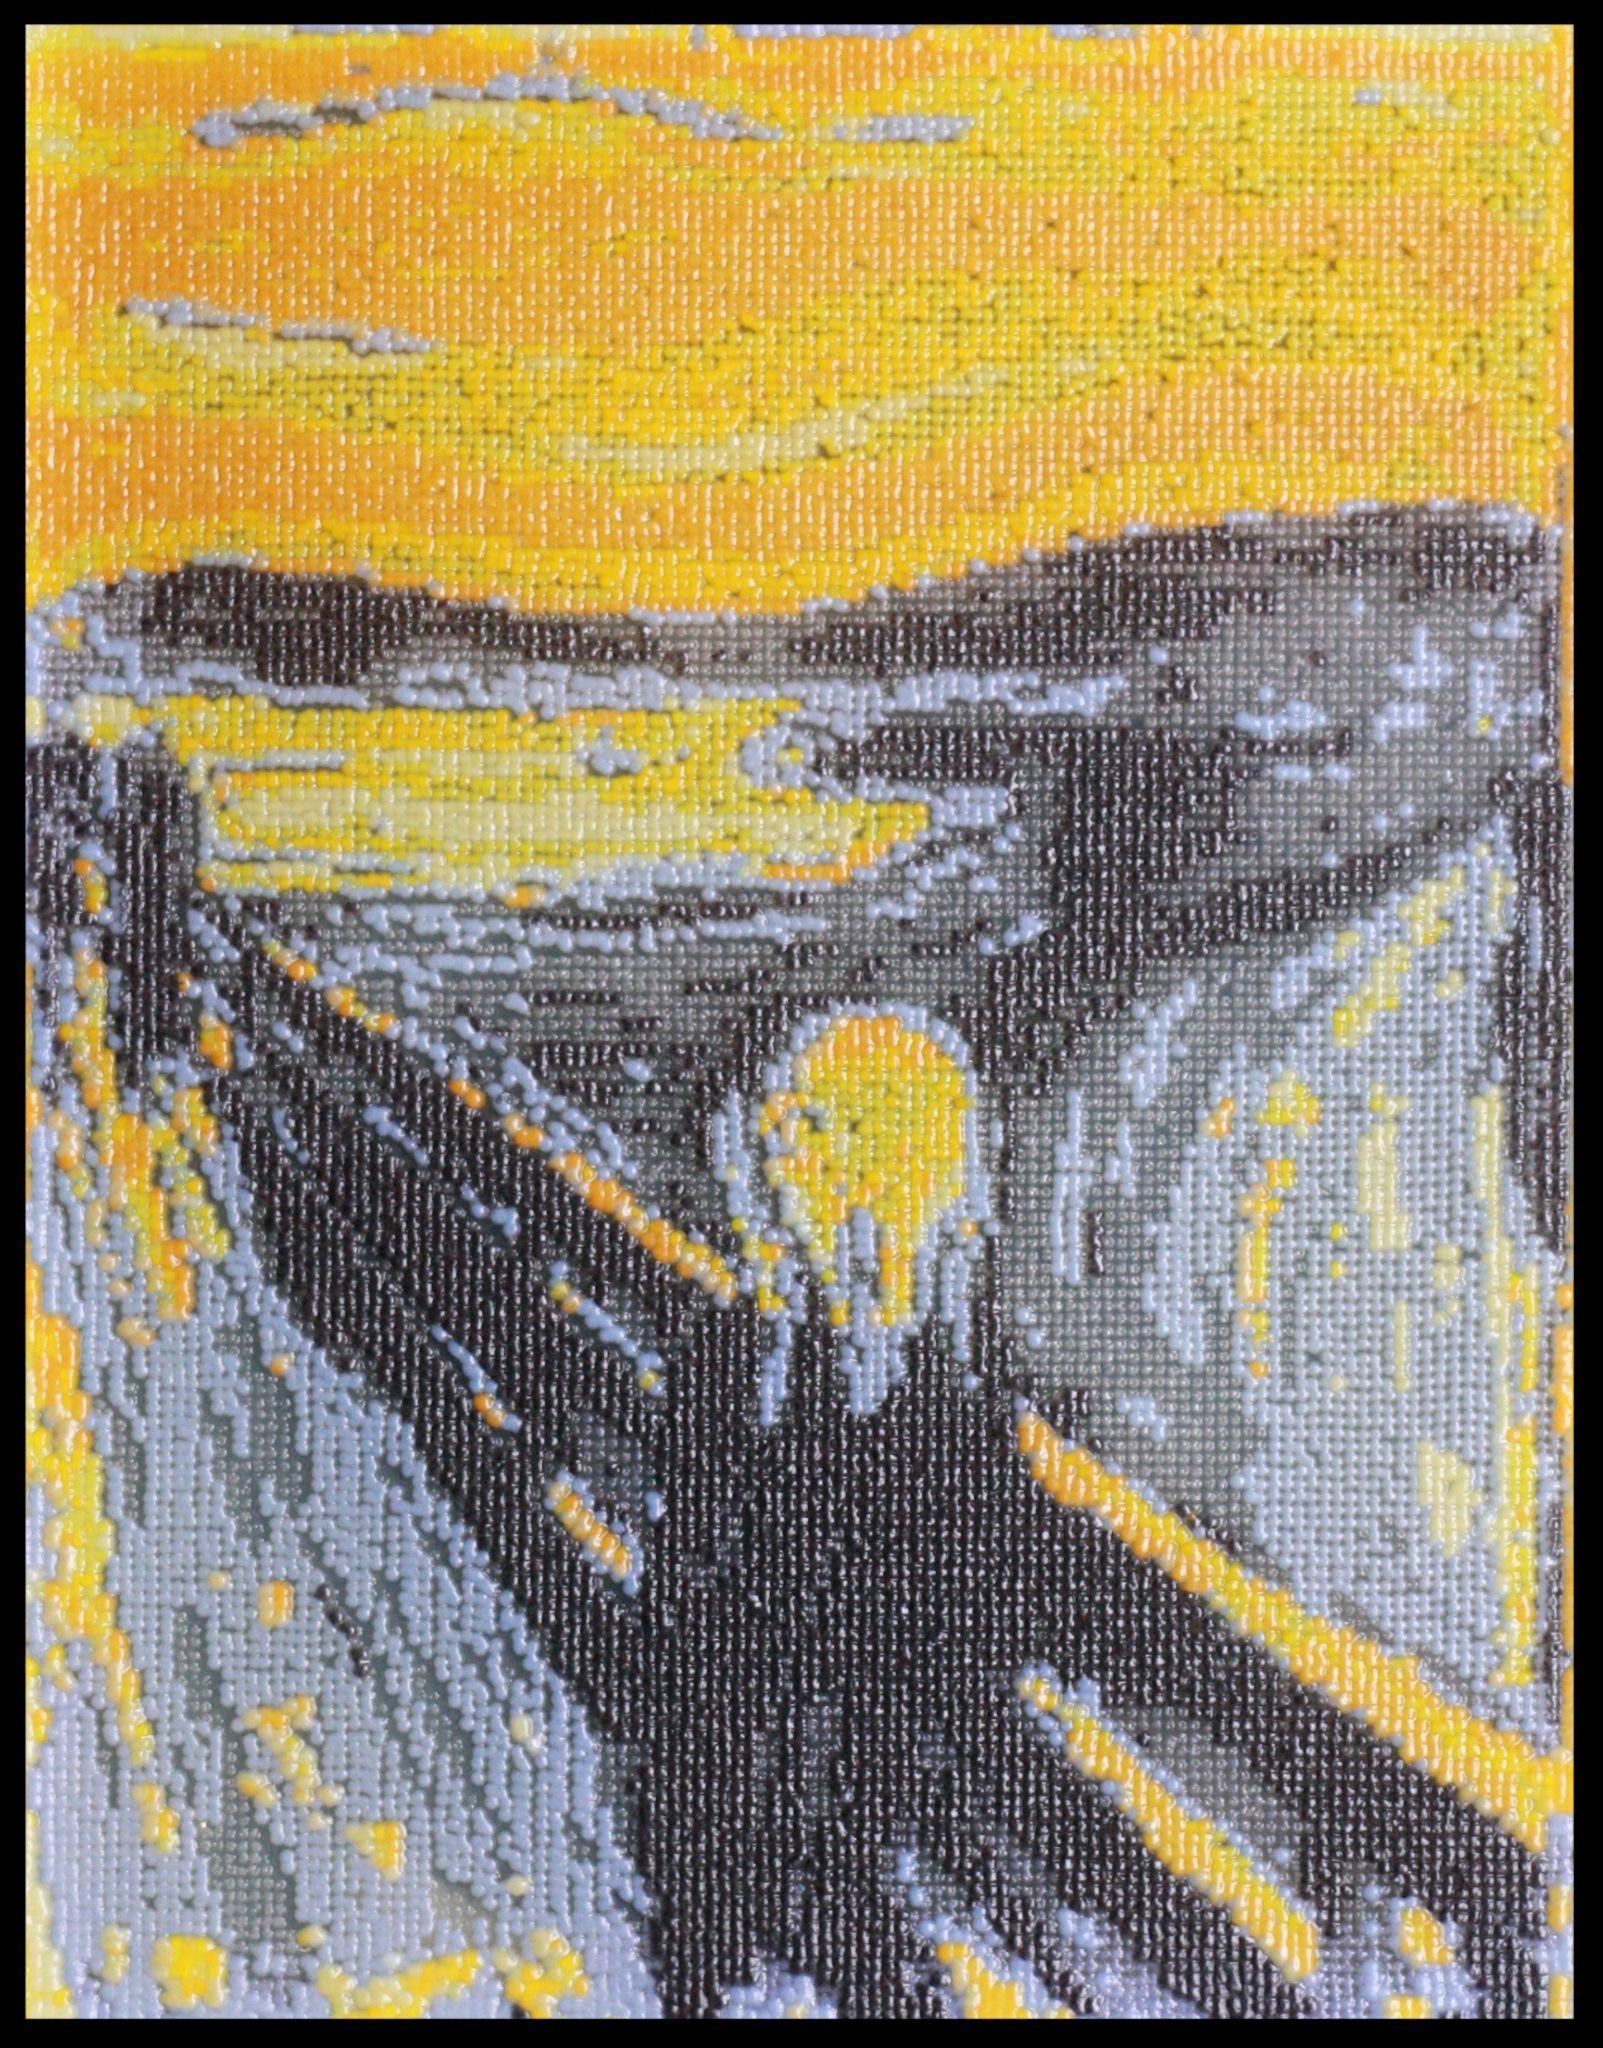 a pixelated replication of the famous painting, the scream, created with yeast